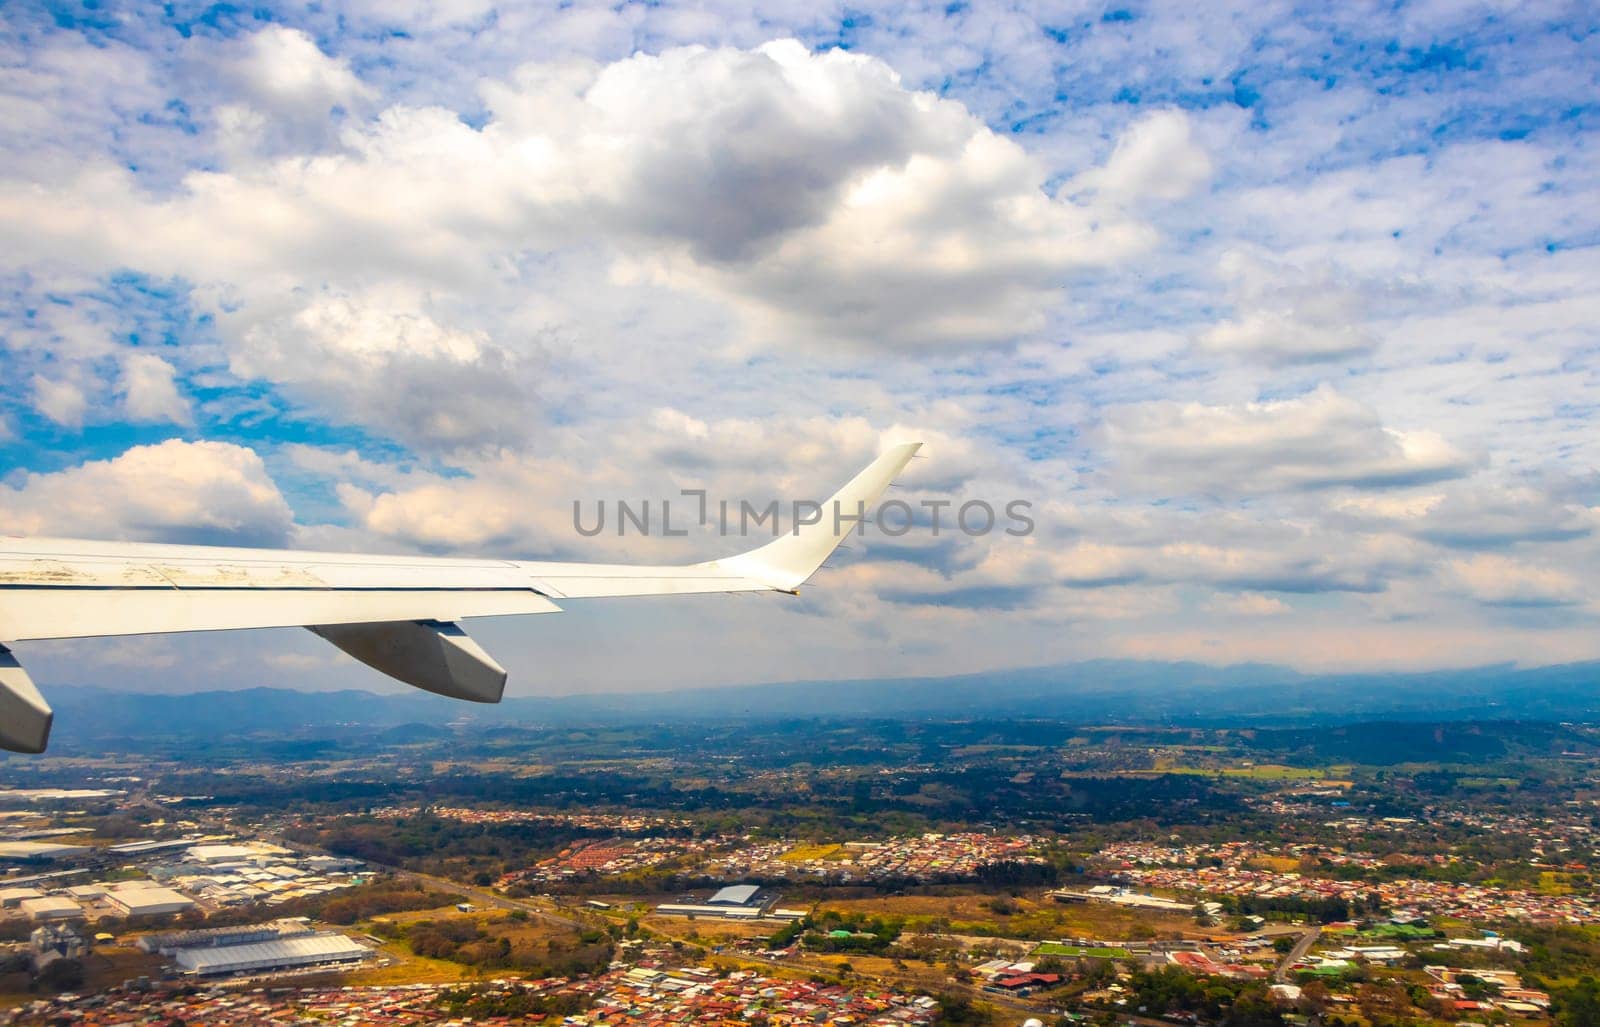 Runway airport and city mountains panorama view from airplane in Rio Segundo Alajuela Costa Rica in Central America.